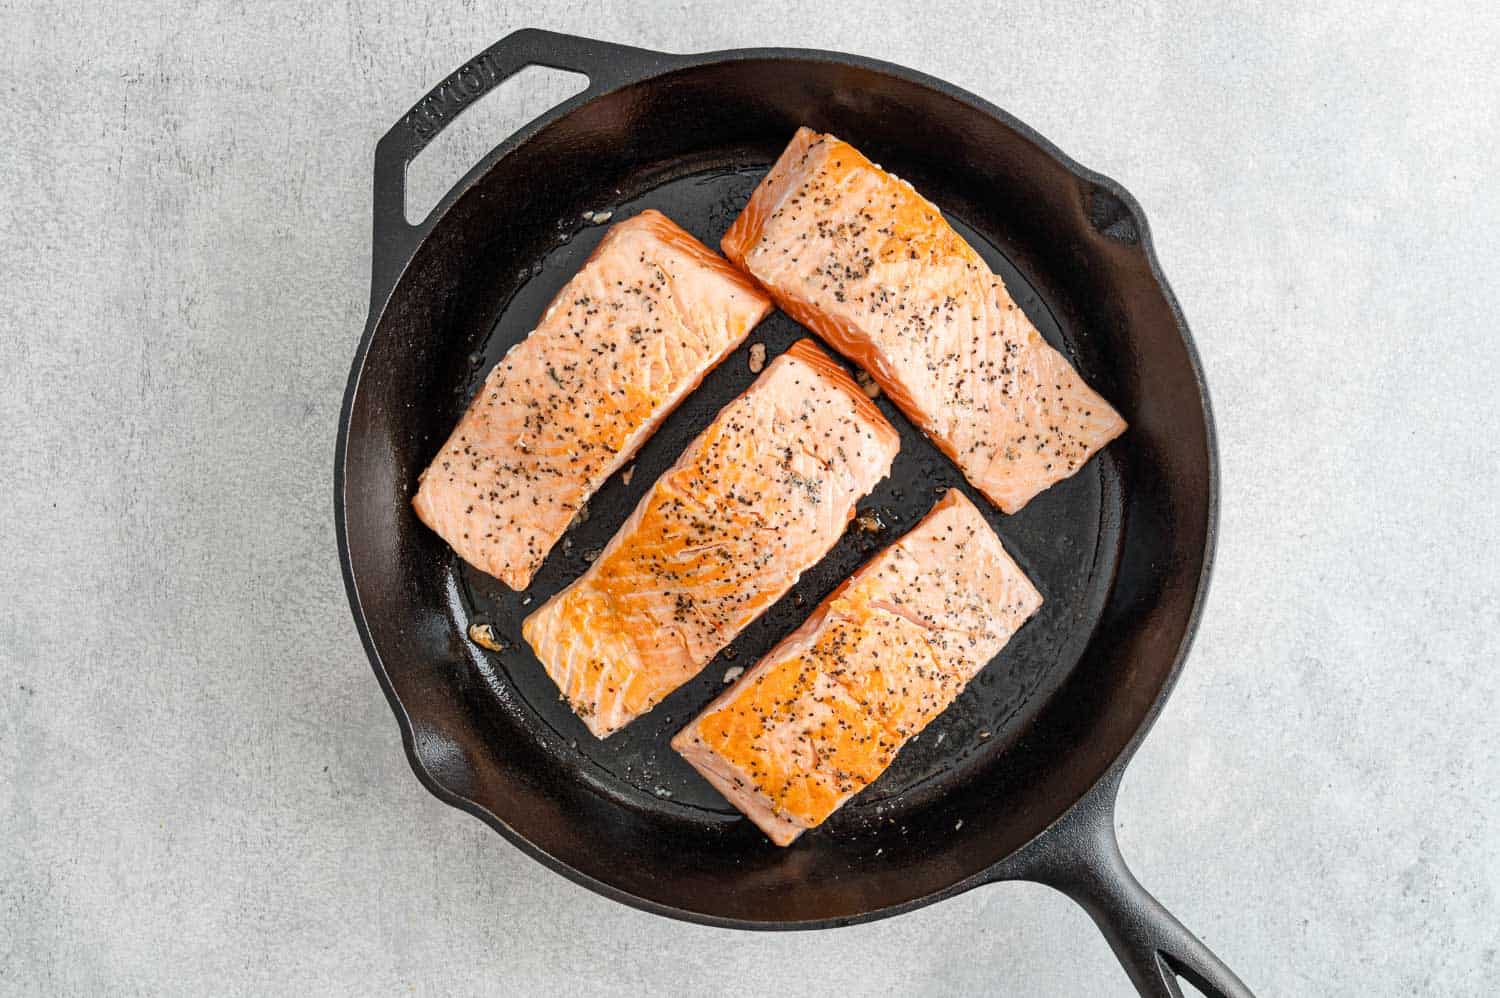 Salmon fillets face up in frying pan, lightly browned.